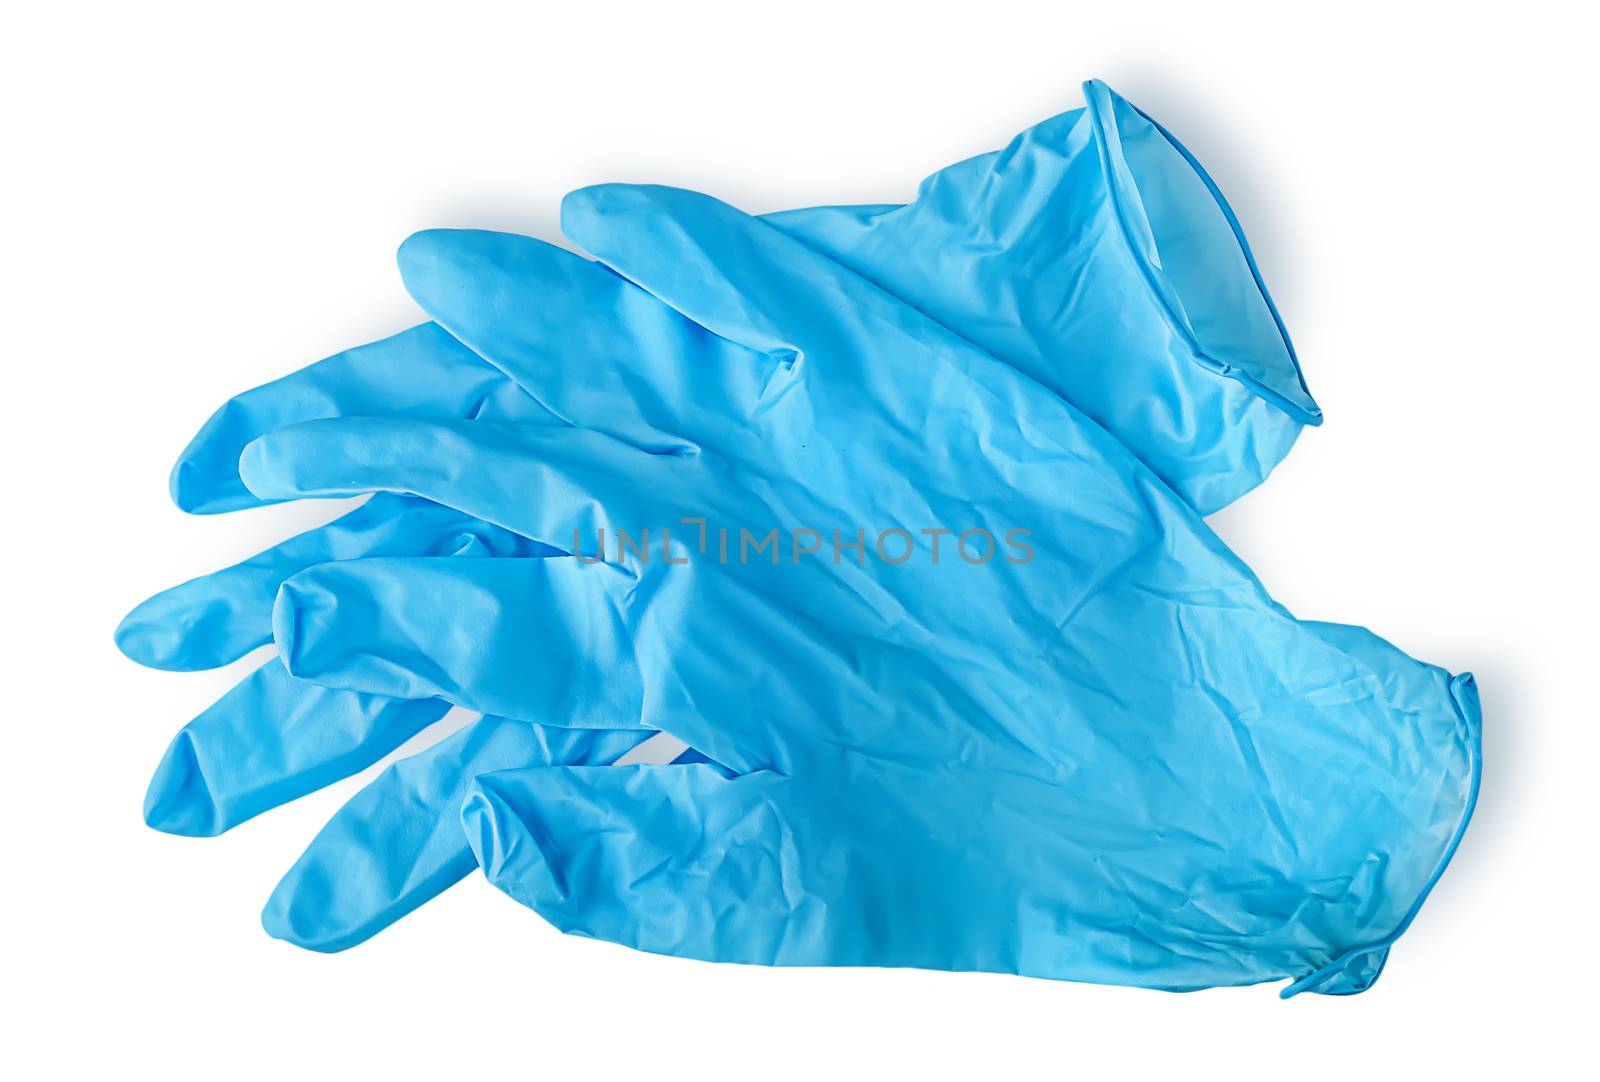 Pair blue medical gloves isolated on white background